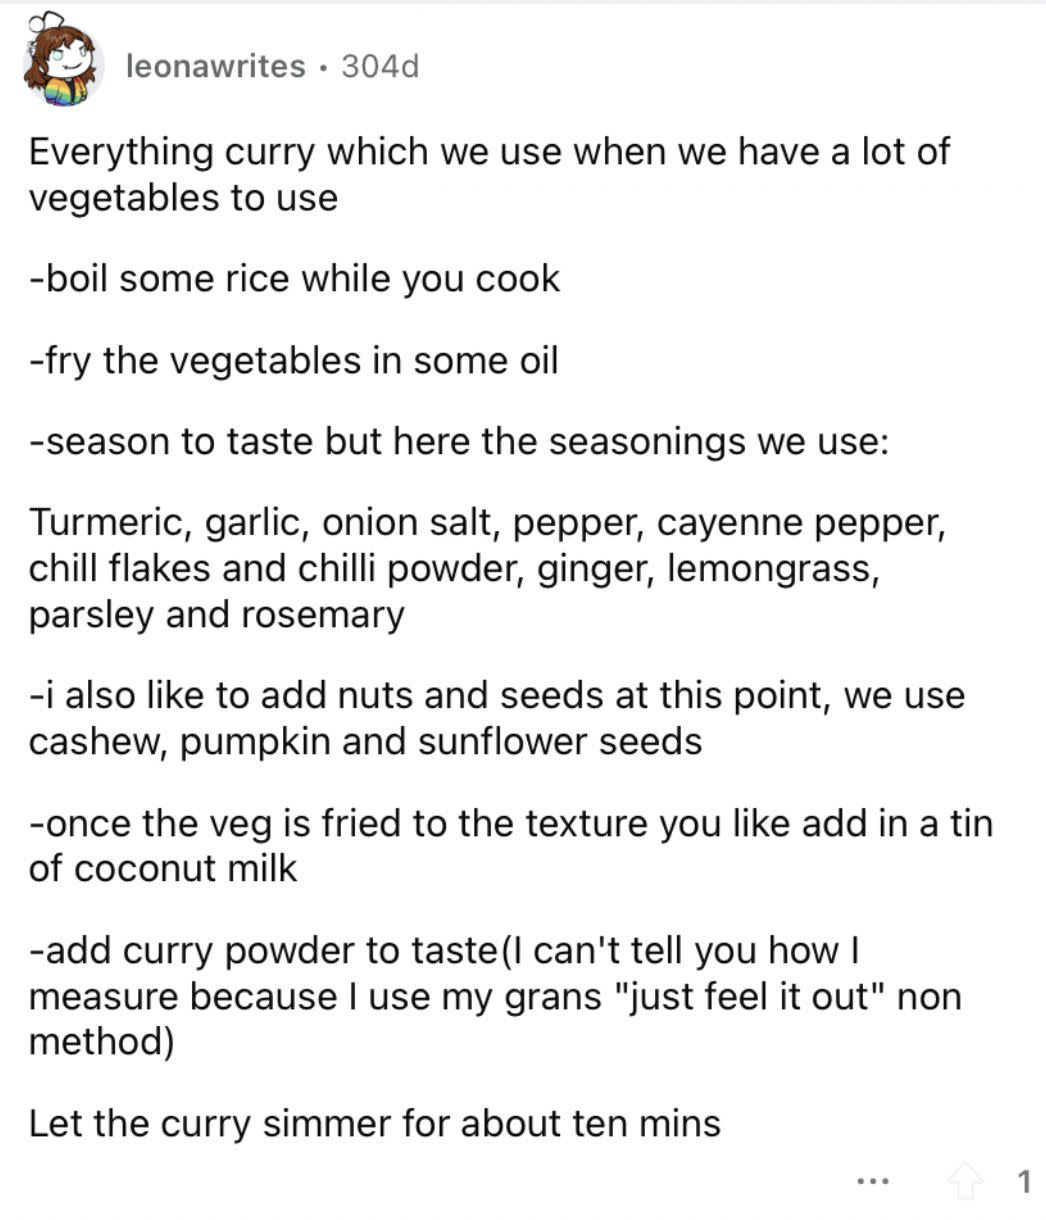 Reddit screenshot about a cheap and easy everything curry.